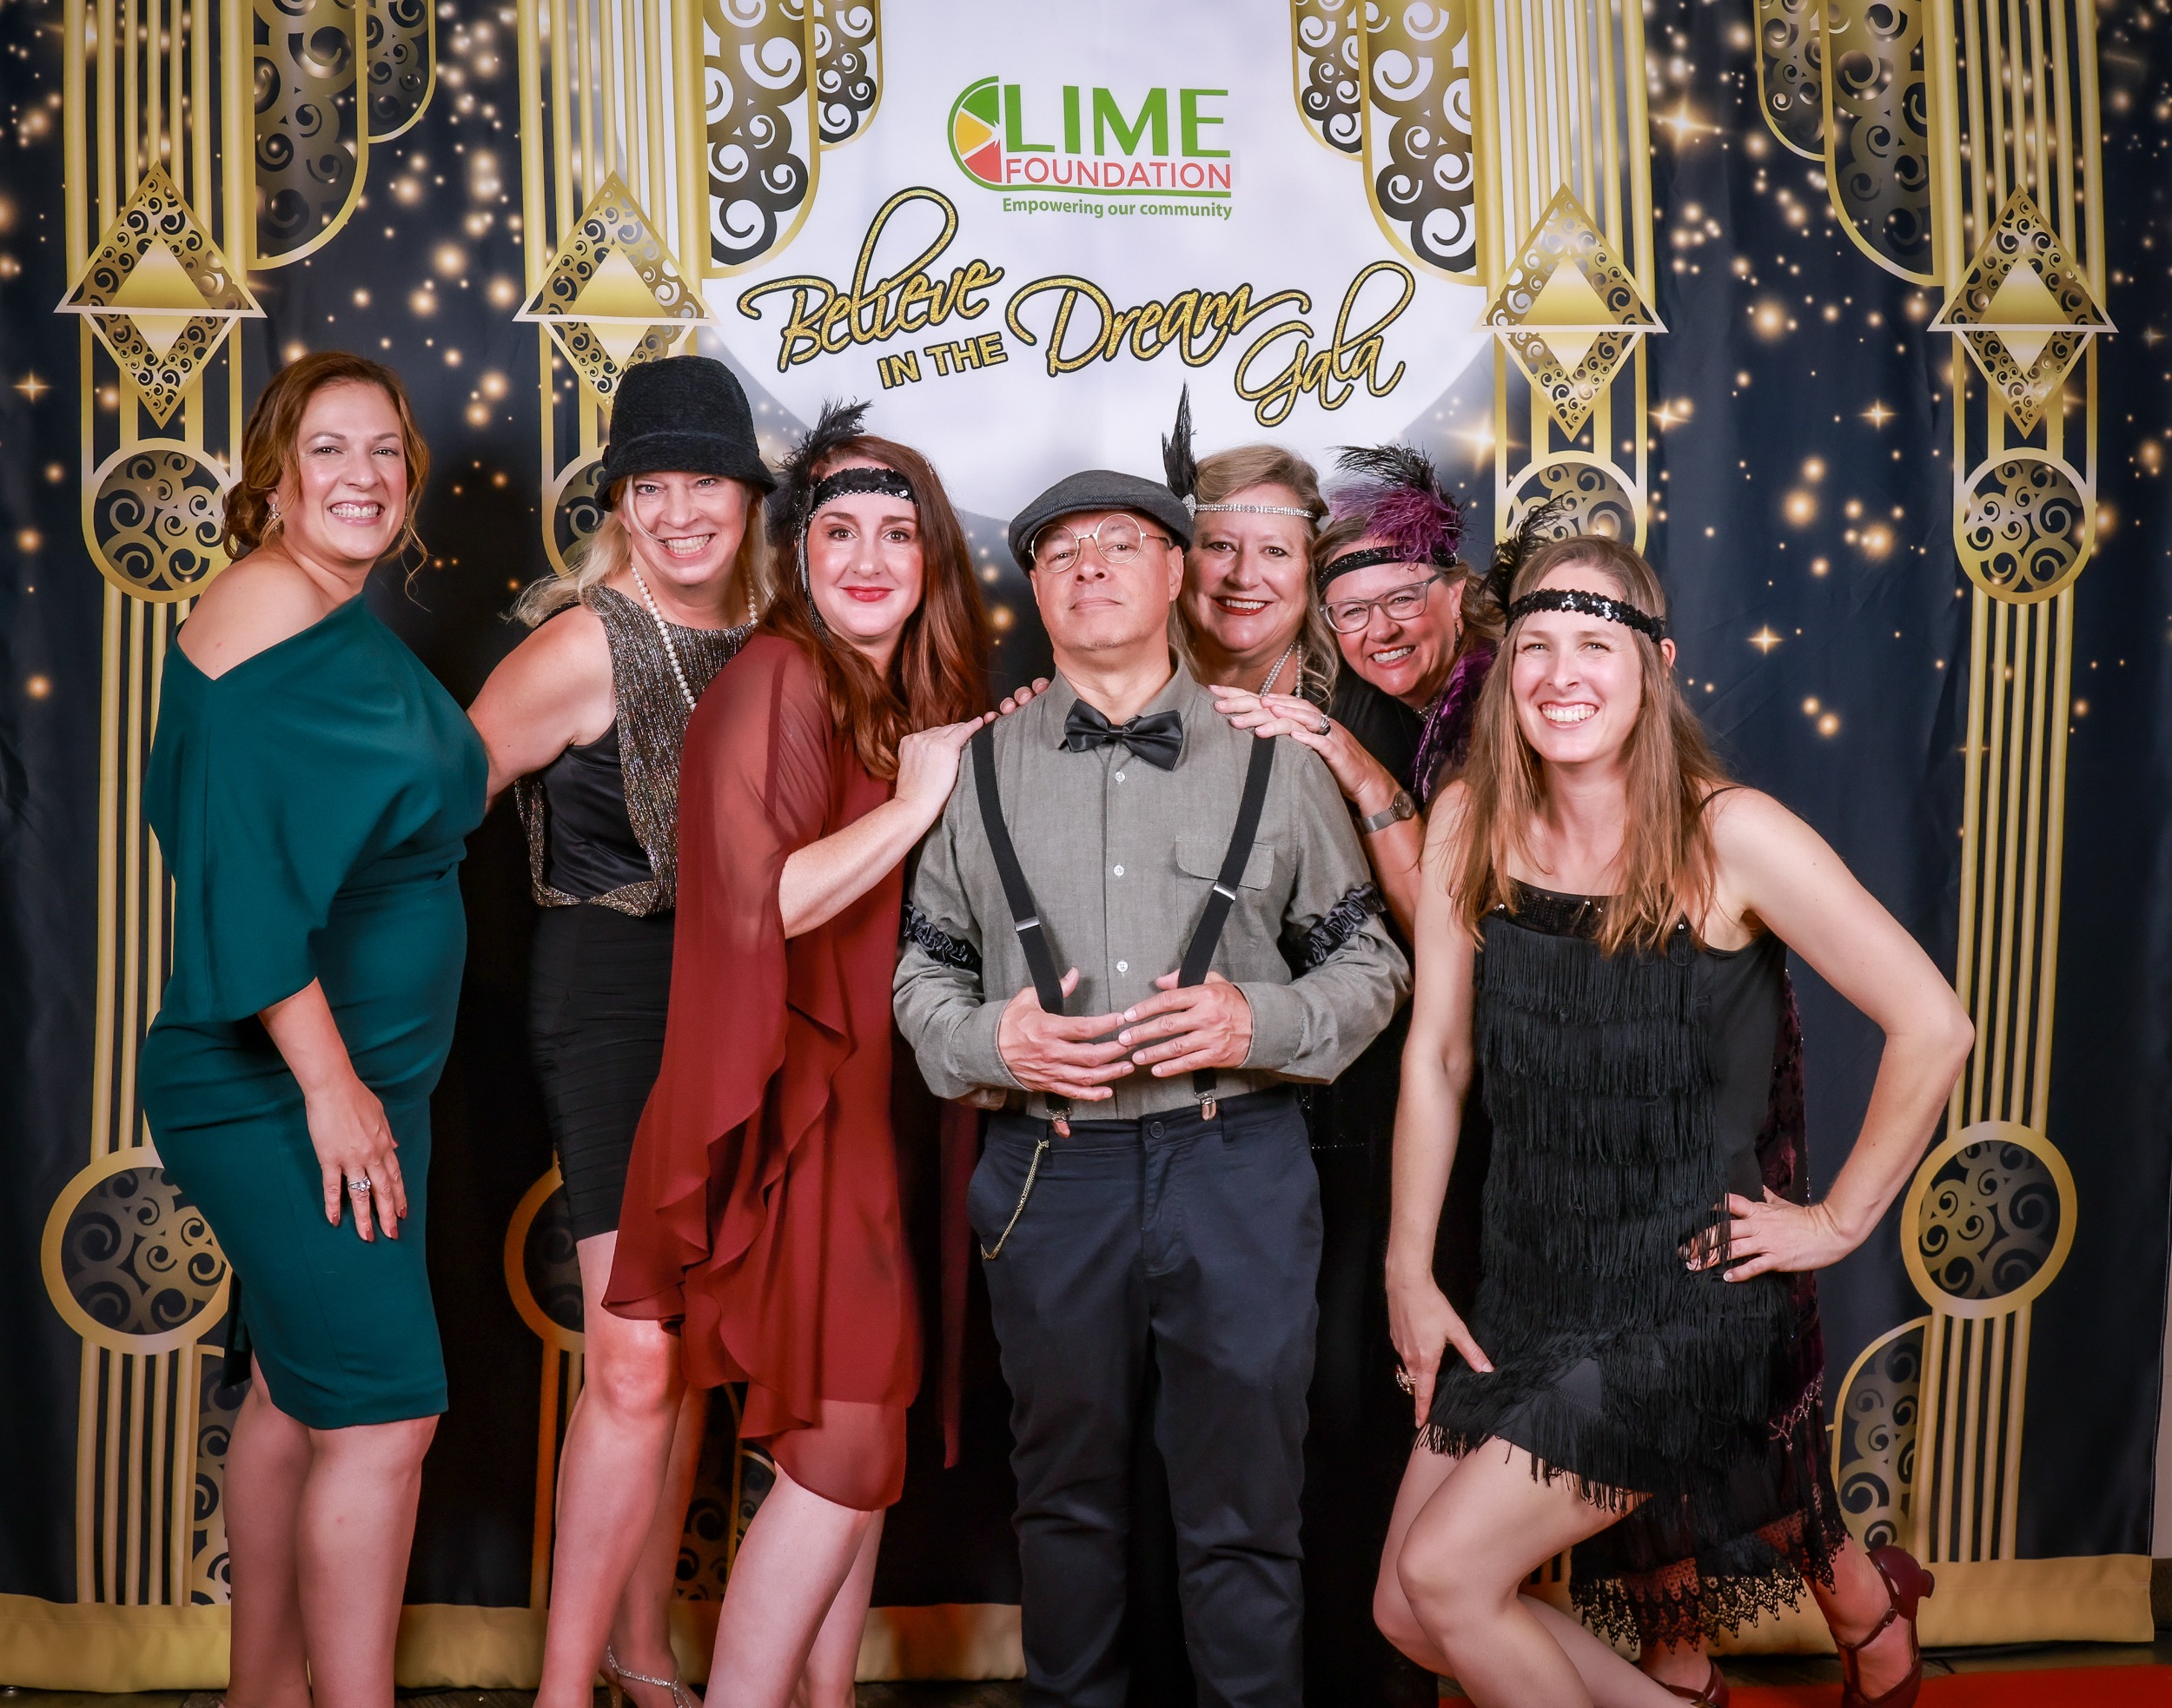 A group of people posing for a picture at a red carpet event hosted by The LIME Foundation of Santa Rosa.